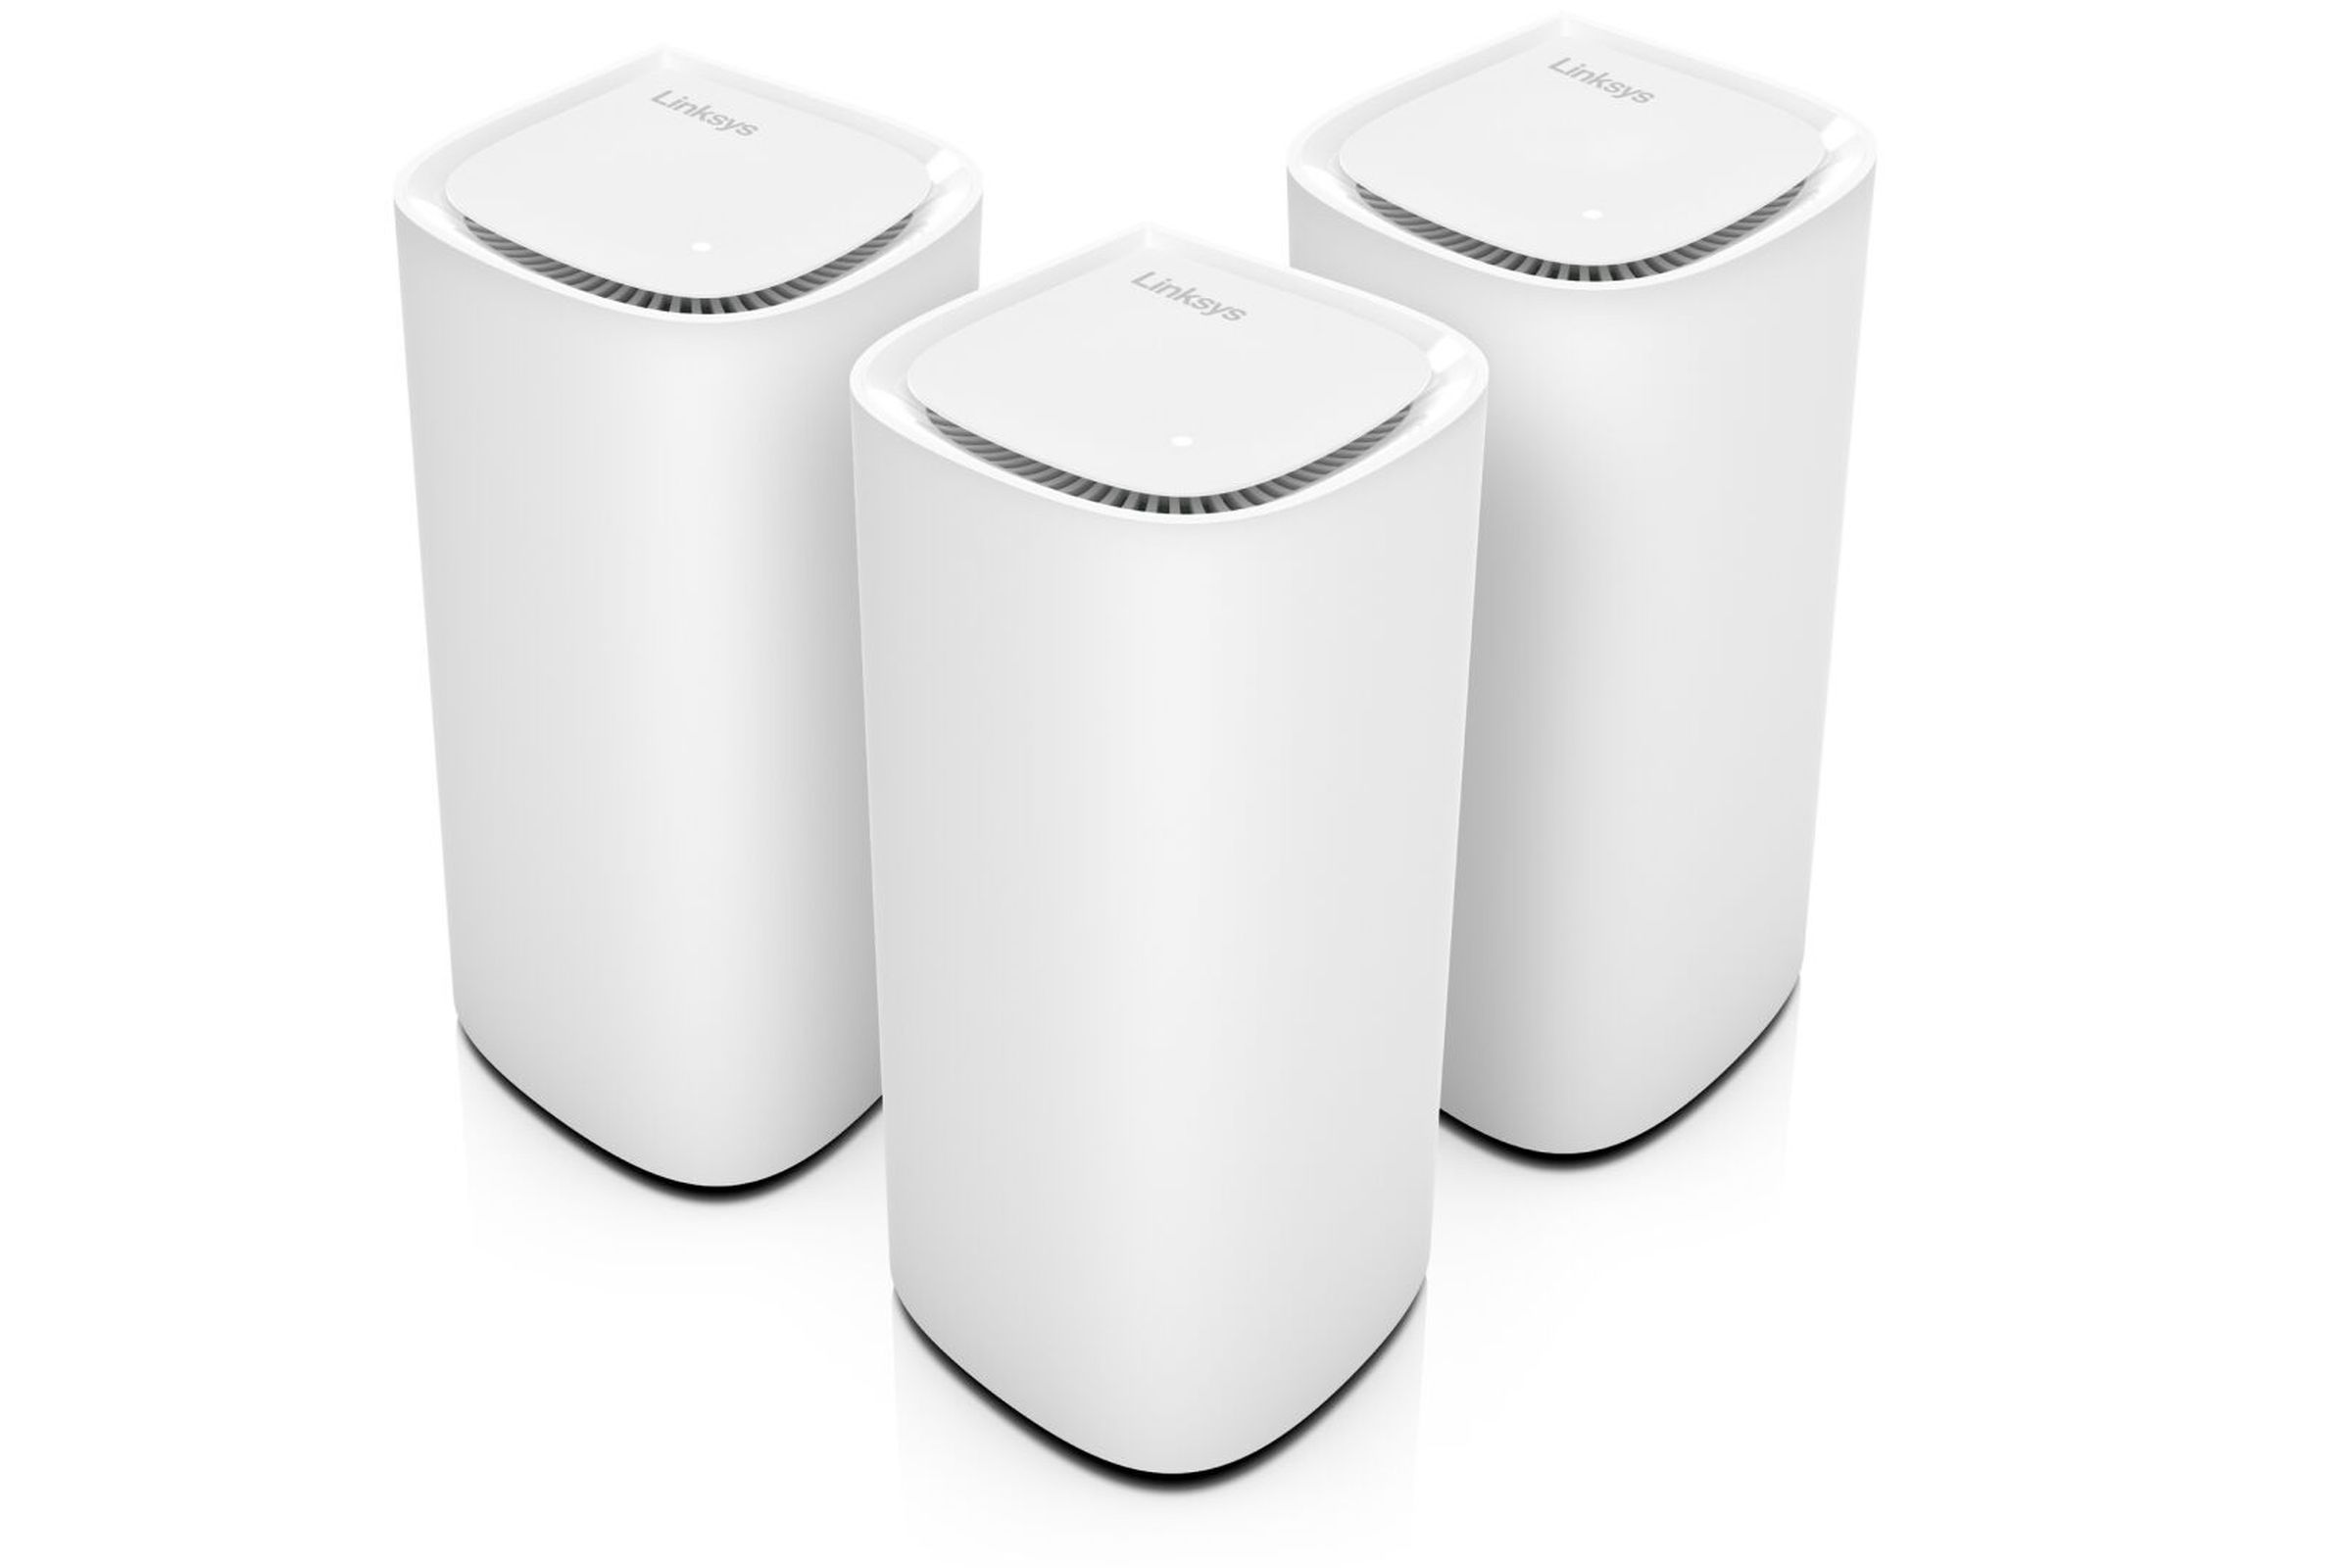 An image of a Velop Pro 7 three-pack arranged with one in front and two behind.